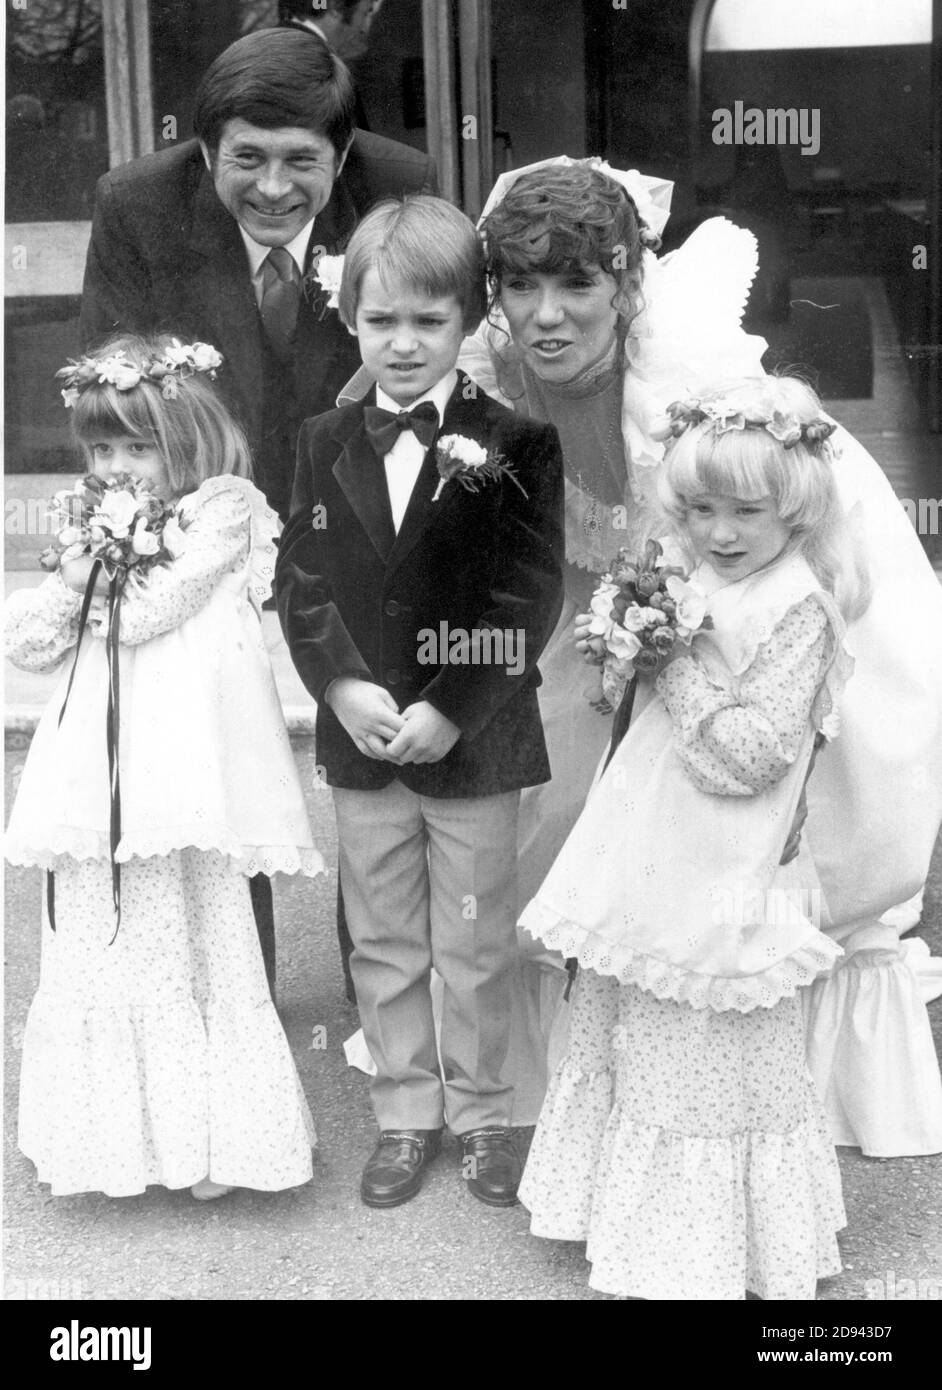 THE WEDDING OF RACING DRIVER DAVID PURLEY TO GAIL WARD 1981.  PORTSMOUTH. Stock Photo